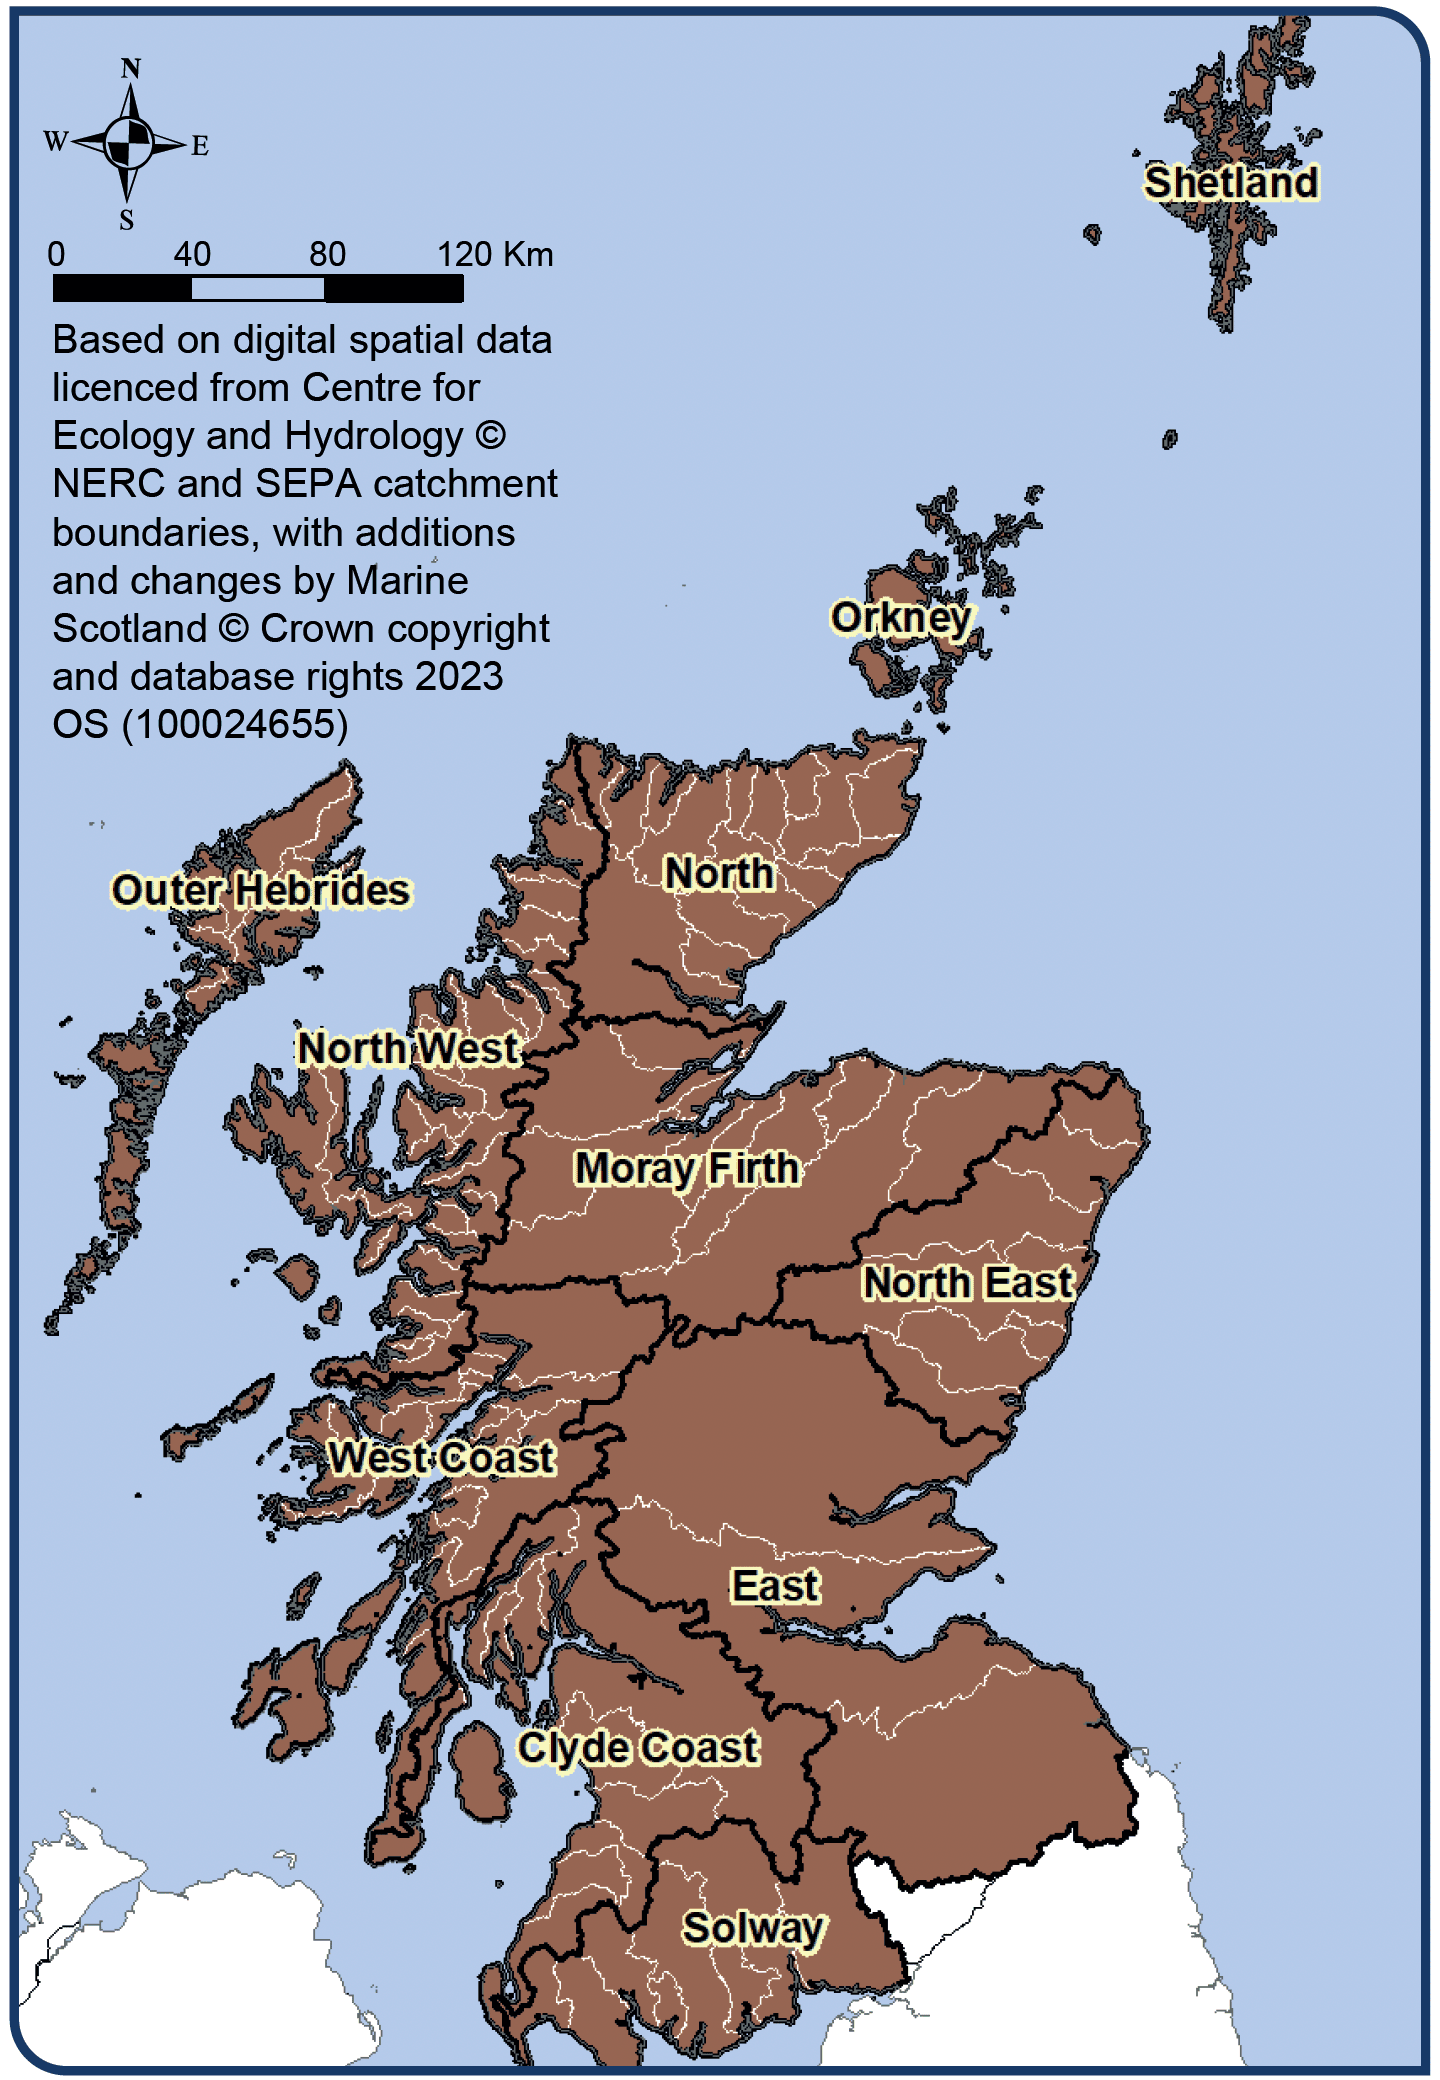 Map of Scotland showing labelled salmon regions (Clyde Coast, East, Moray Firth, North, North East, North West, Orkney, Outer Hebrides, Shetland, Solway, West Coast) and boundaries only of salmon districts within the regions.